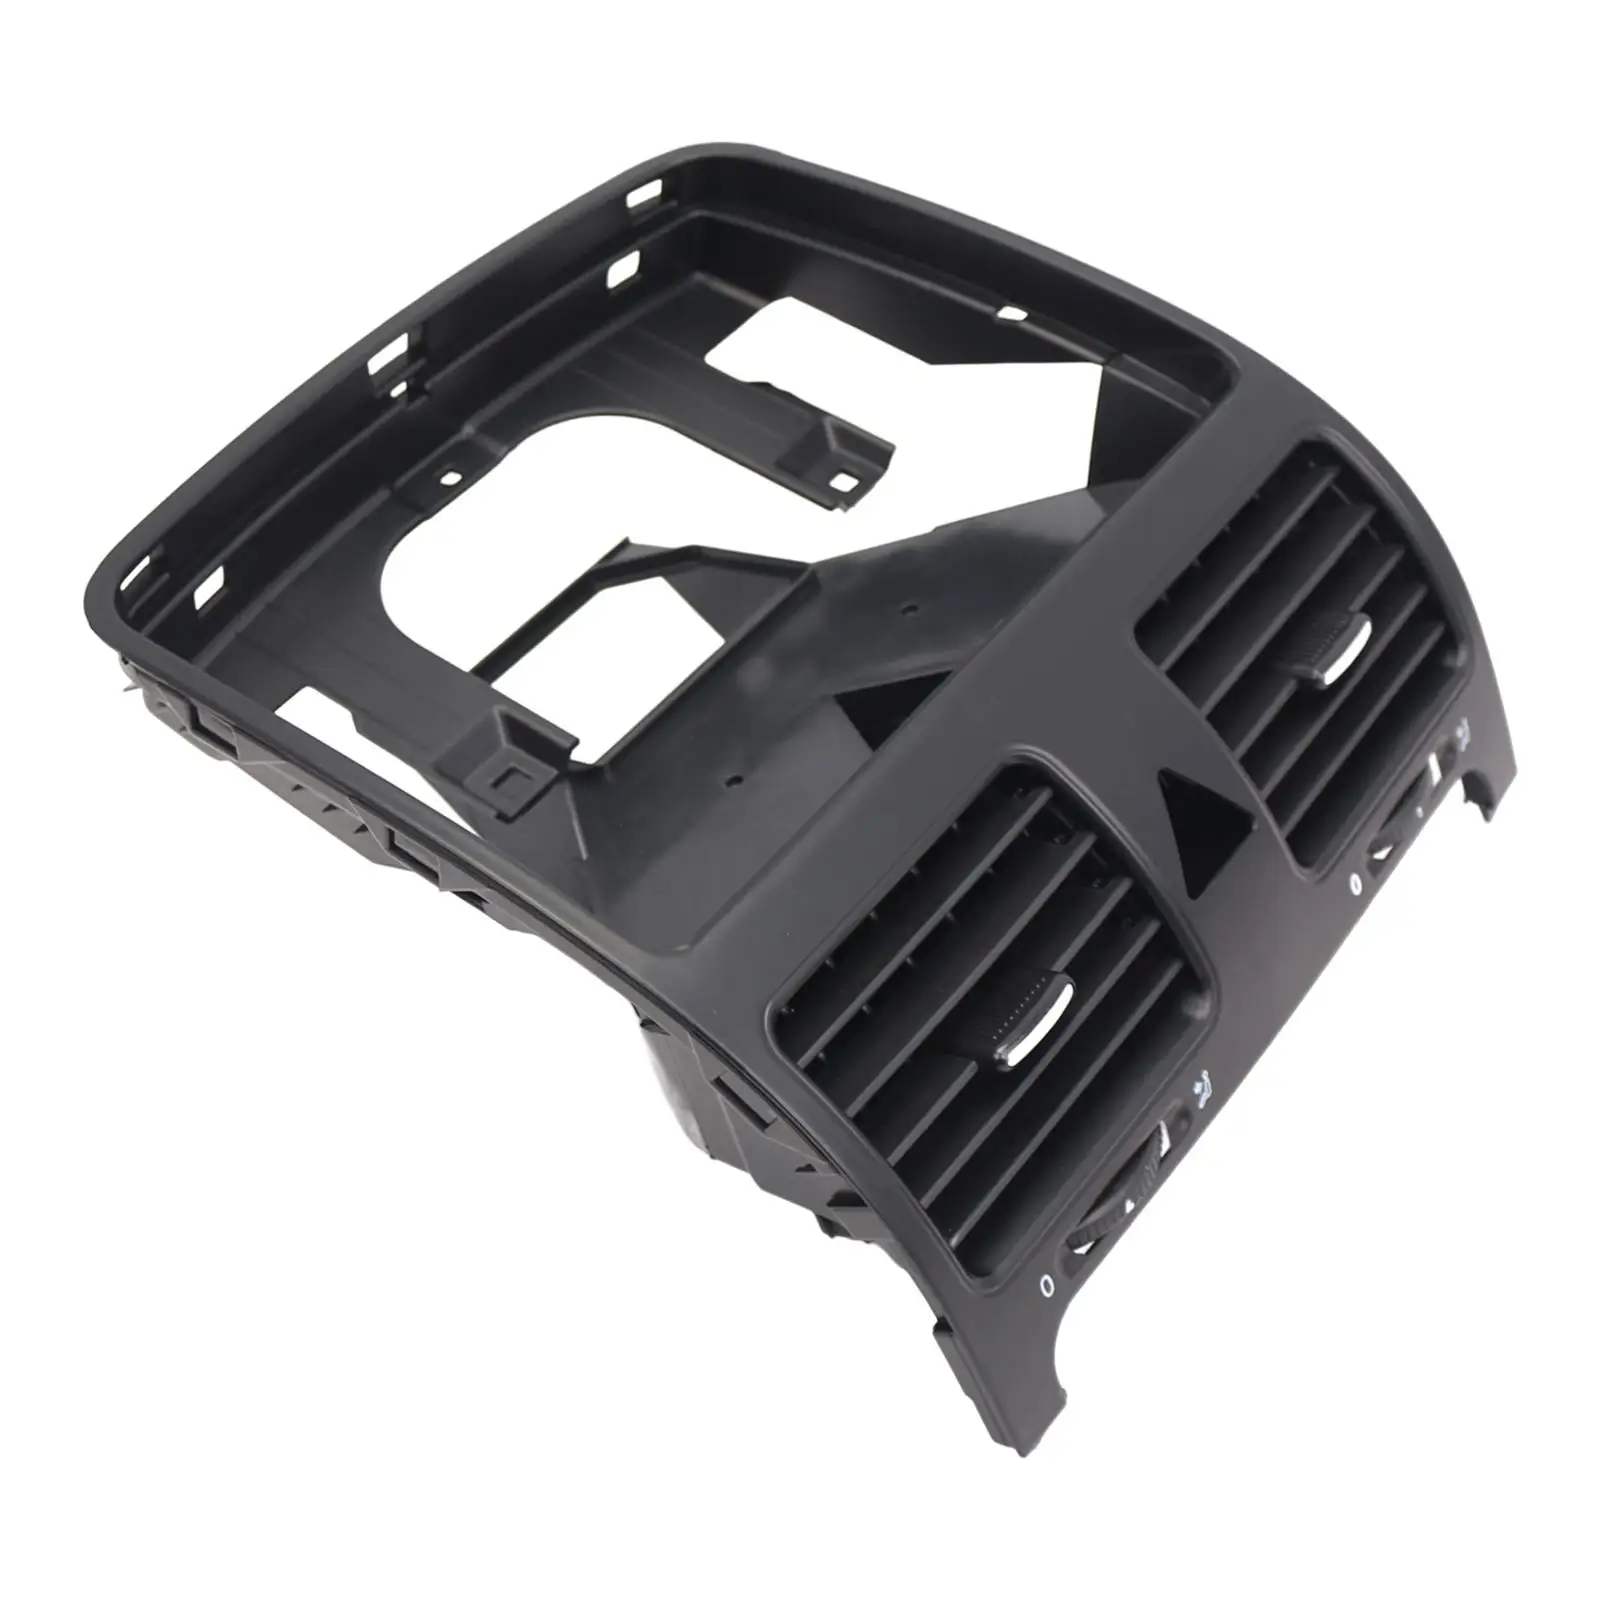 A/C Air Vent Outlet Grille Panel Center Console for forVW Golf MK5 1K0819728H 1K0819743B 1K0 819 728 Replaces Automobile